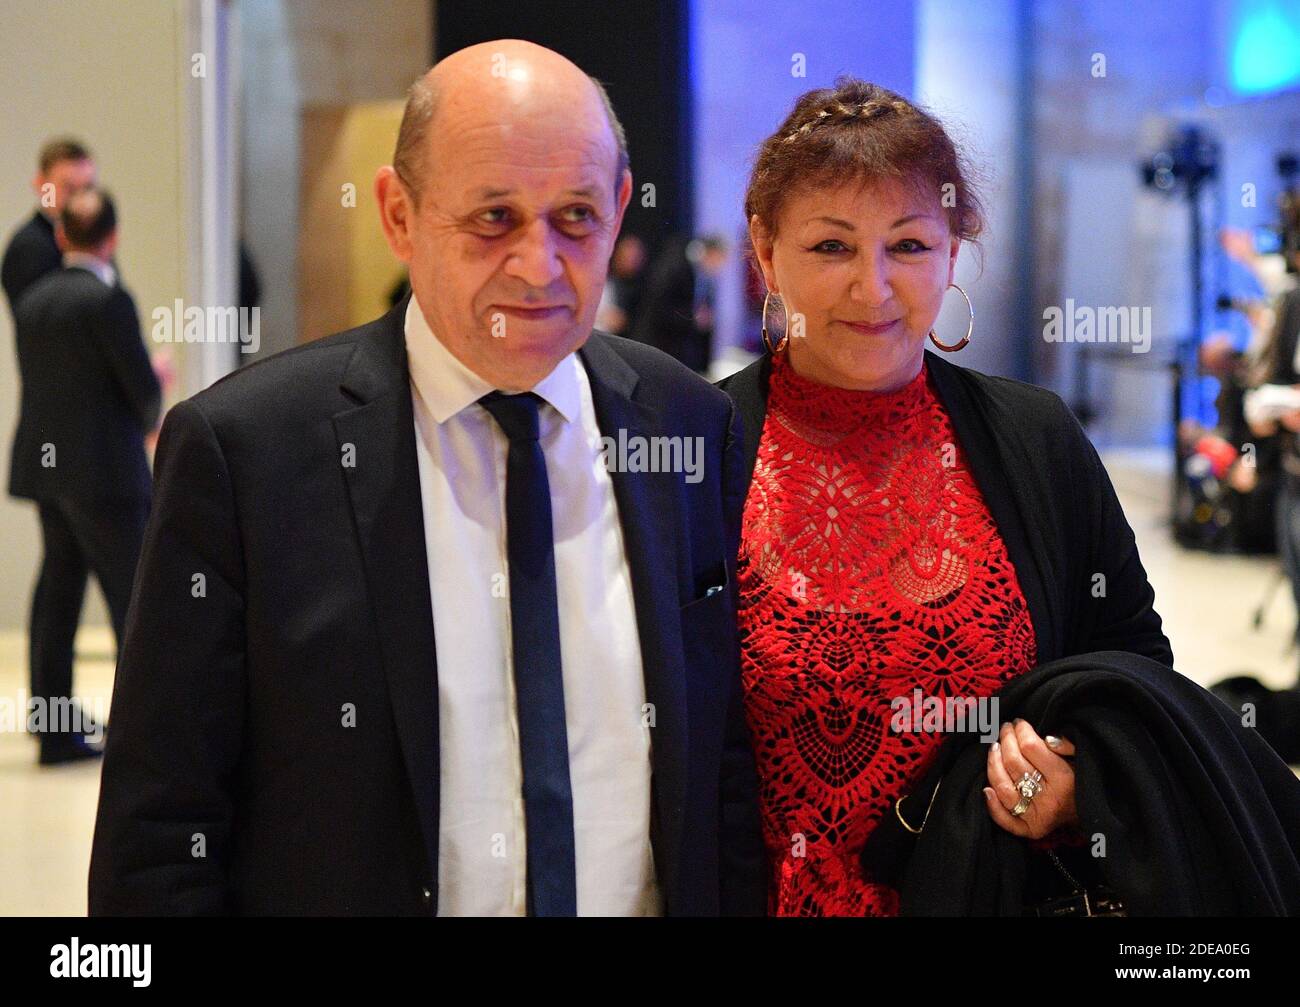 Foreign affairs minister Jean-Yves Le Drian and his wife Maria Vadillo  arriving at the 34th CRIF Representative Council of jewish institutions of  France (conseil representatif des institutions juives de France) annual  diner